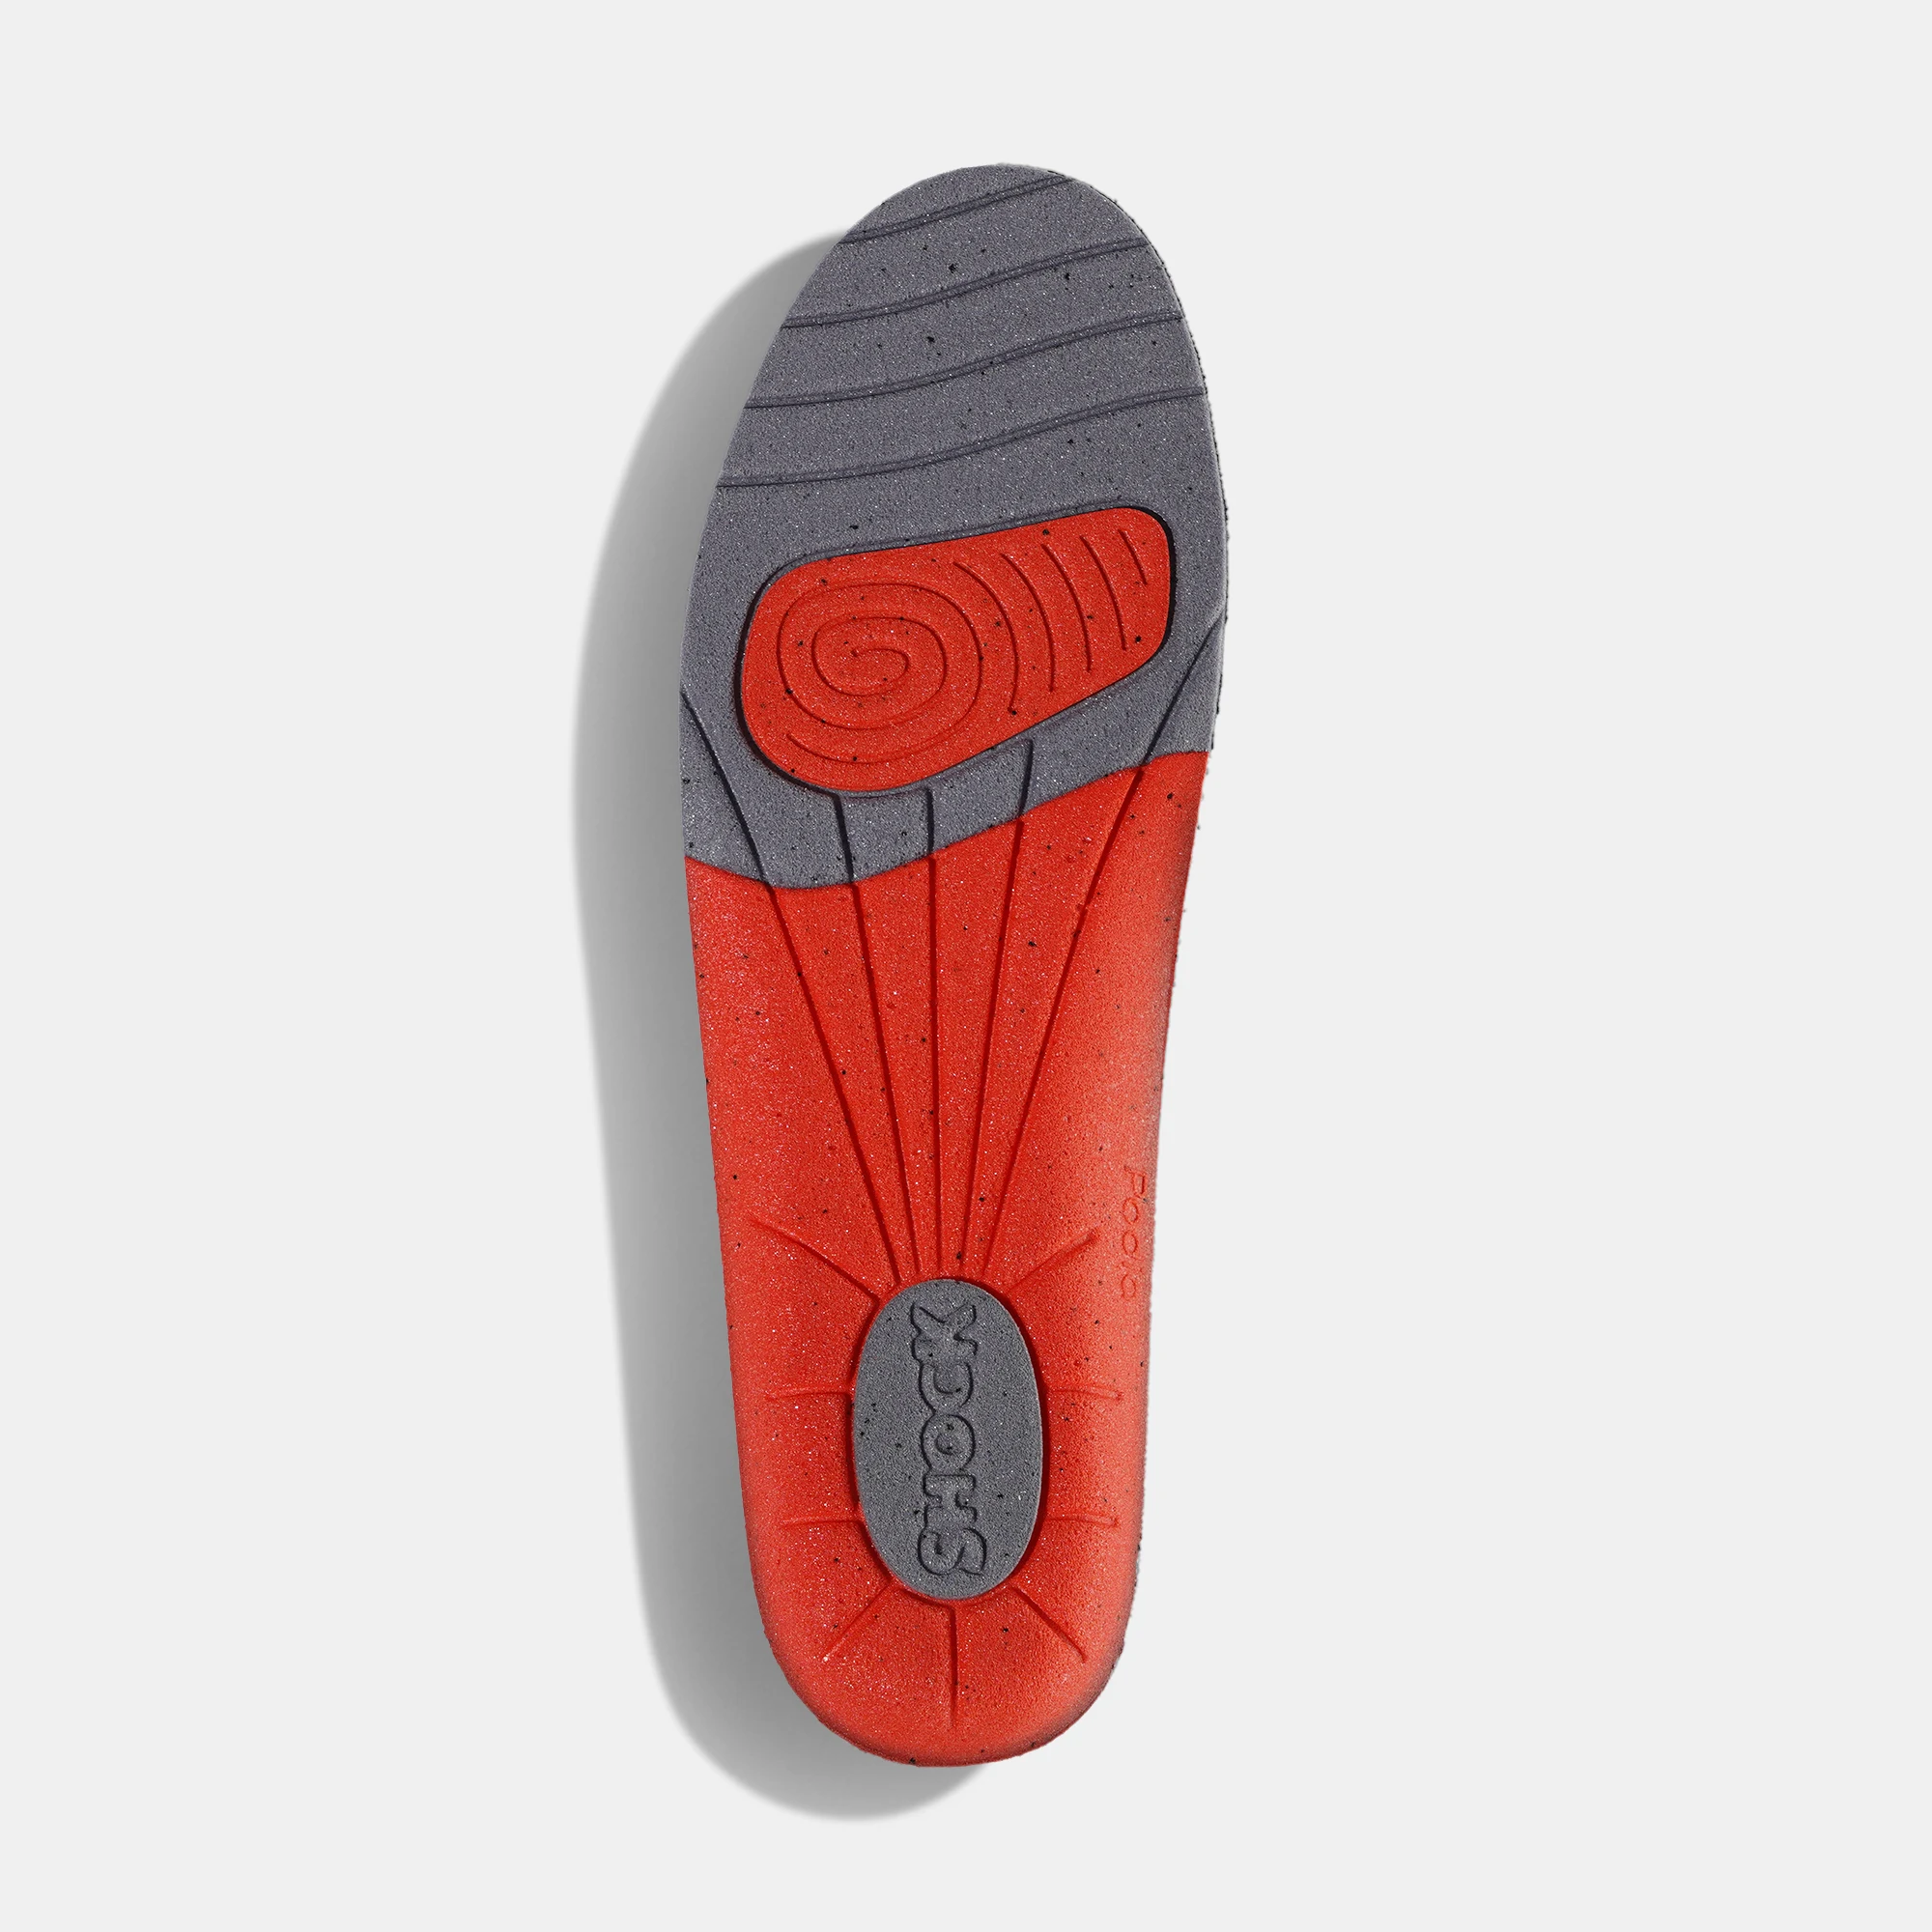 Anatomic Insoles – Everyday comfort & support